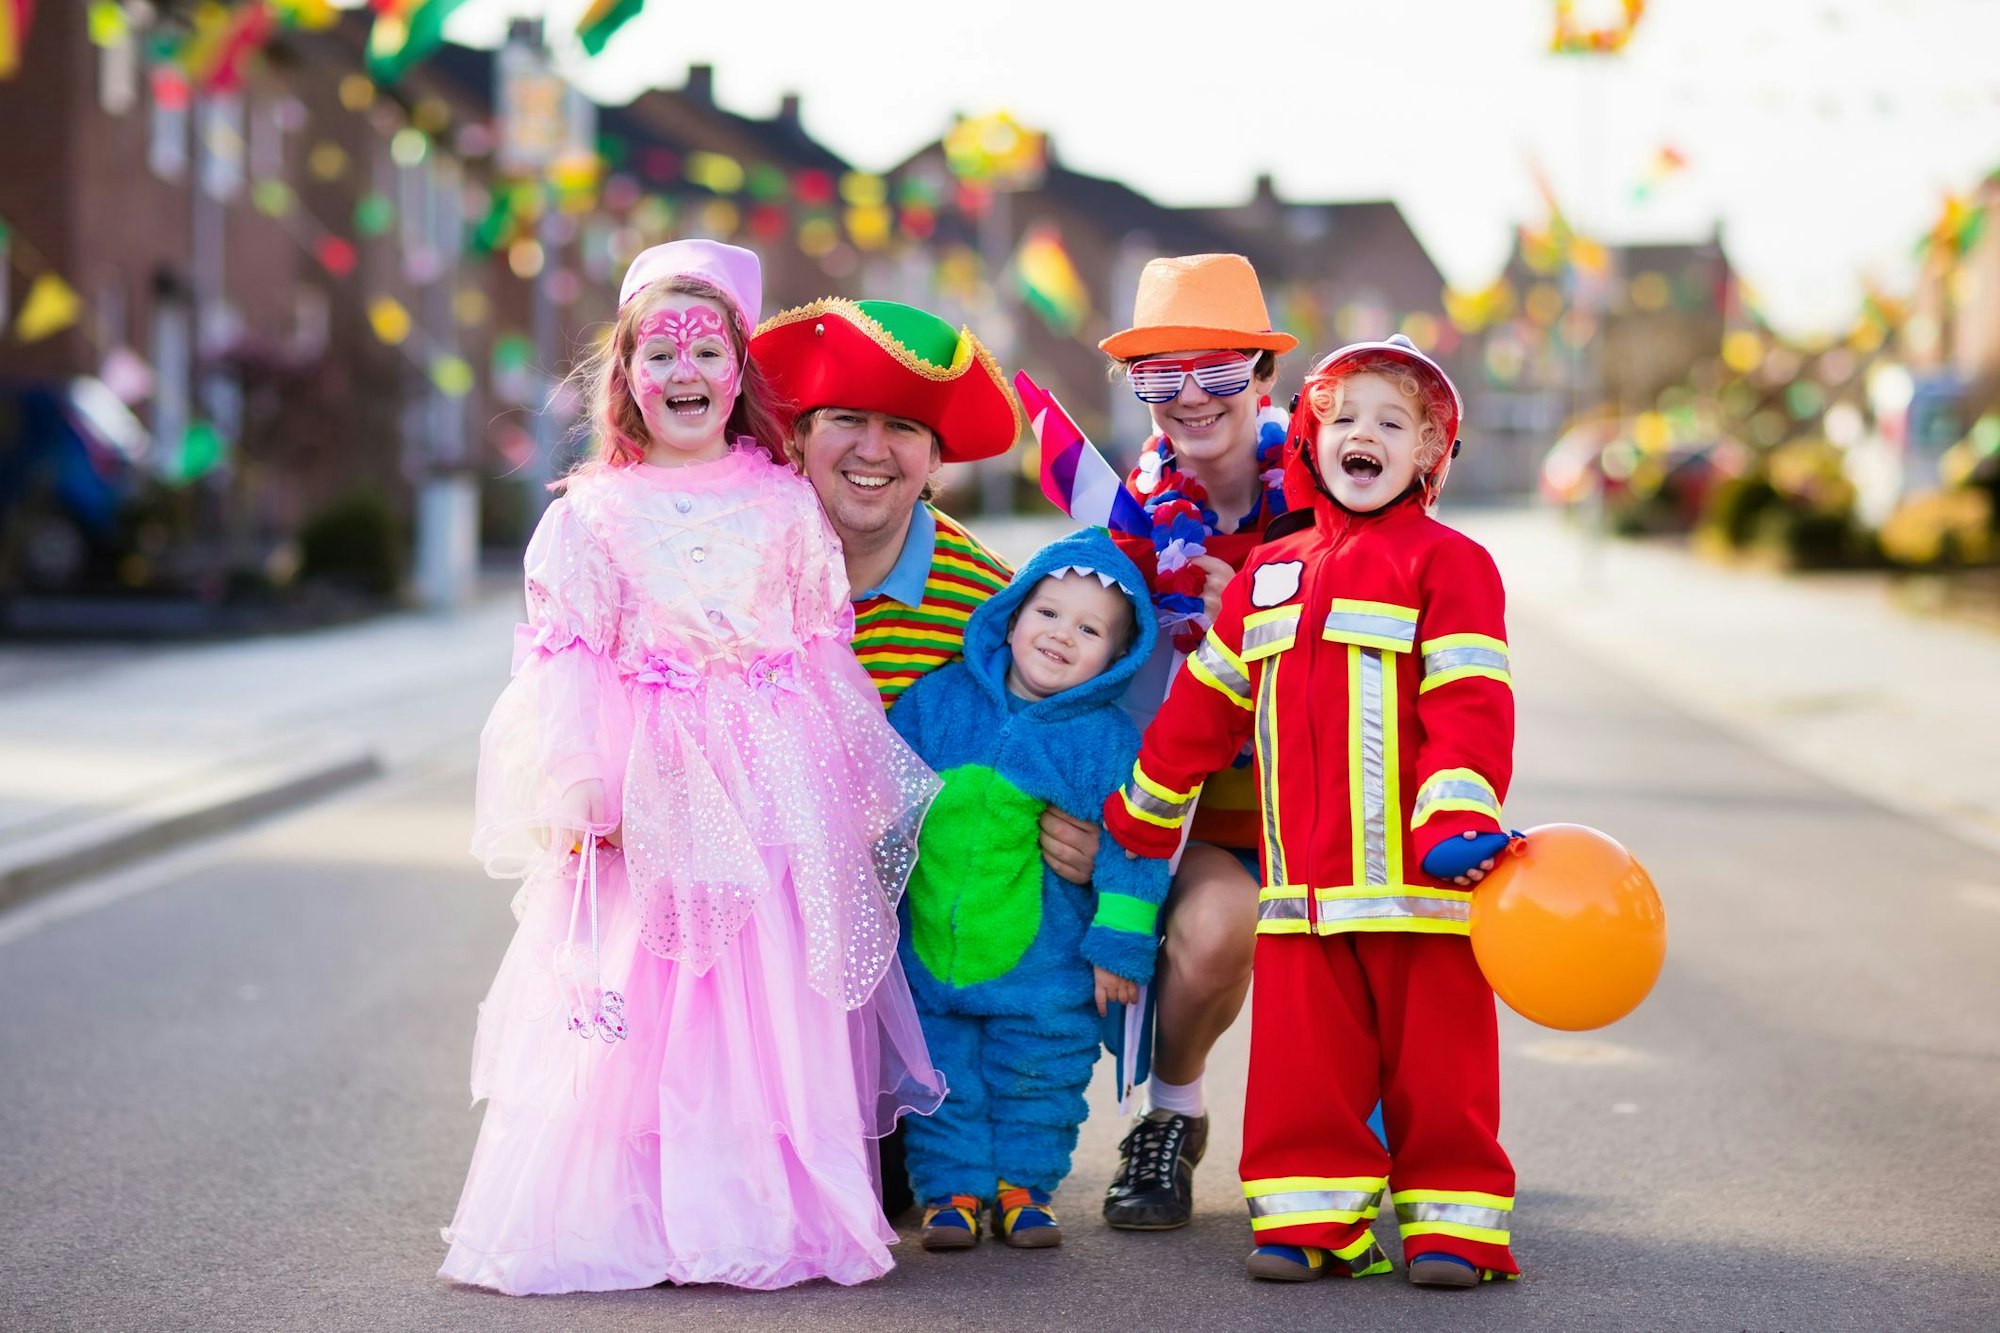 Kids and parents on Halloween trick or treat. Family in Halloween costumes with candy bags walking in decorated street trick or treating. Baby and preschooler celebrating carnival. Child costume.